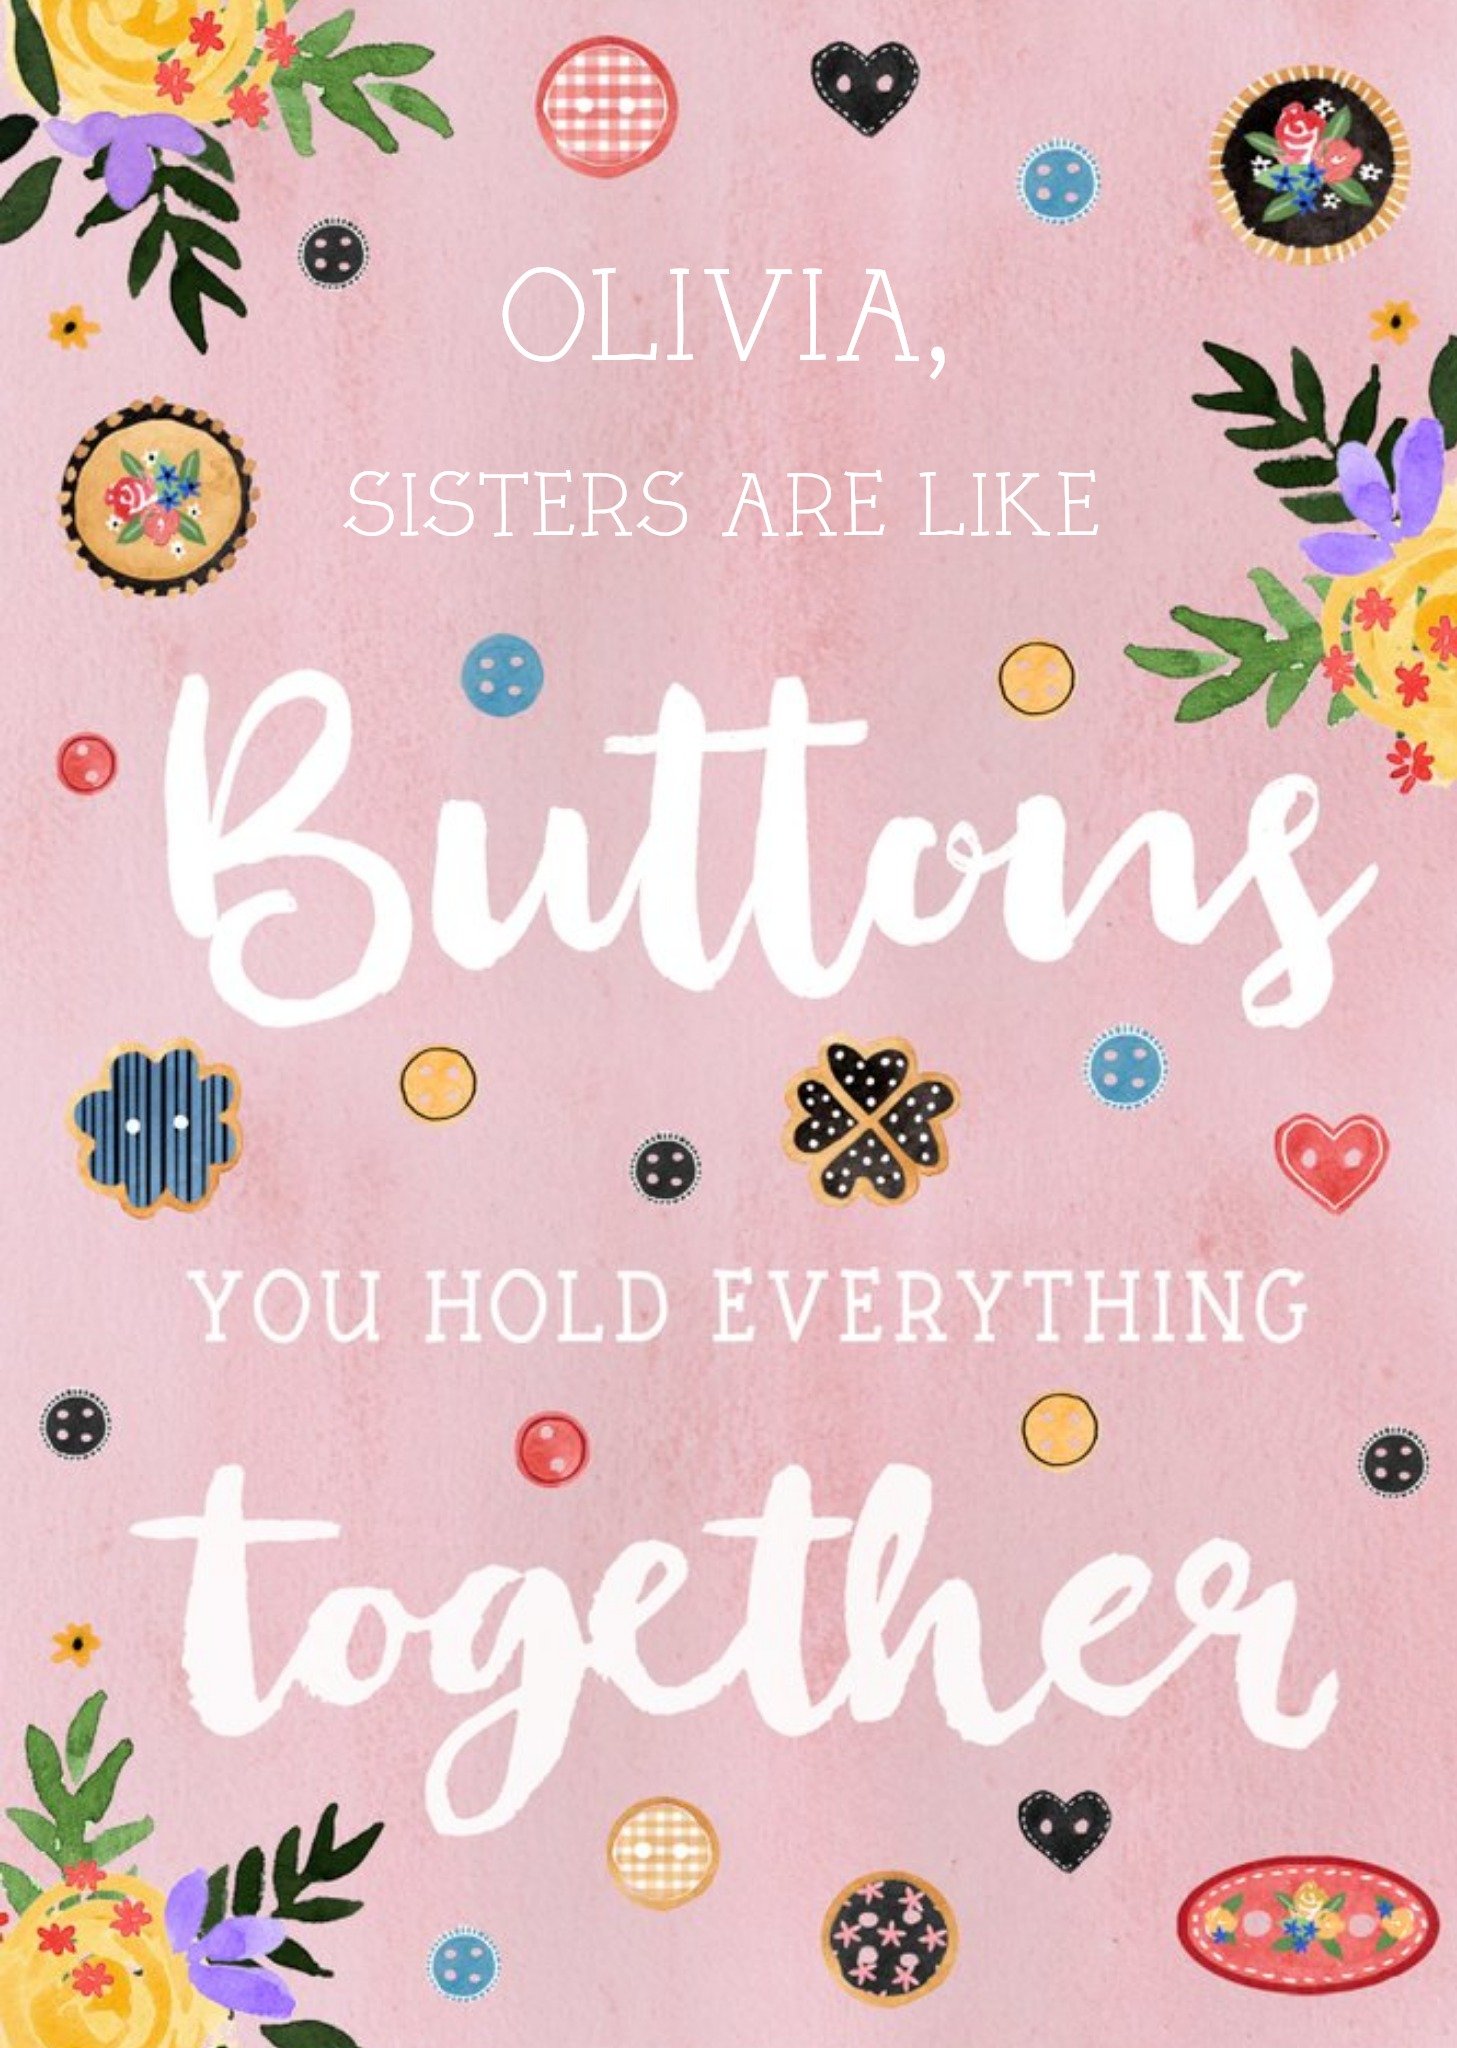 Okey Dokey Design Traditional Illustrated Buttons Hold Everything Together Birthday Card Ecard